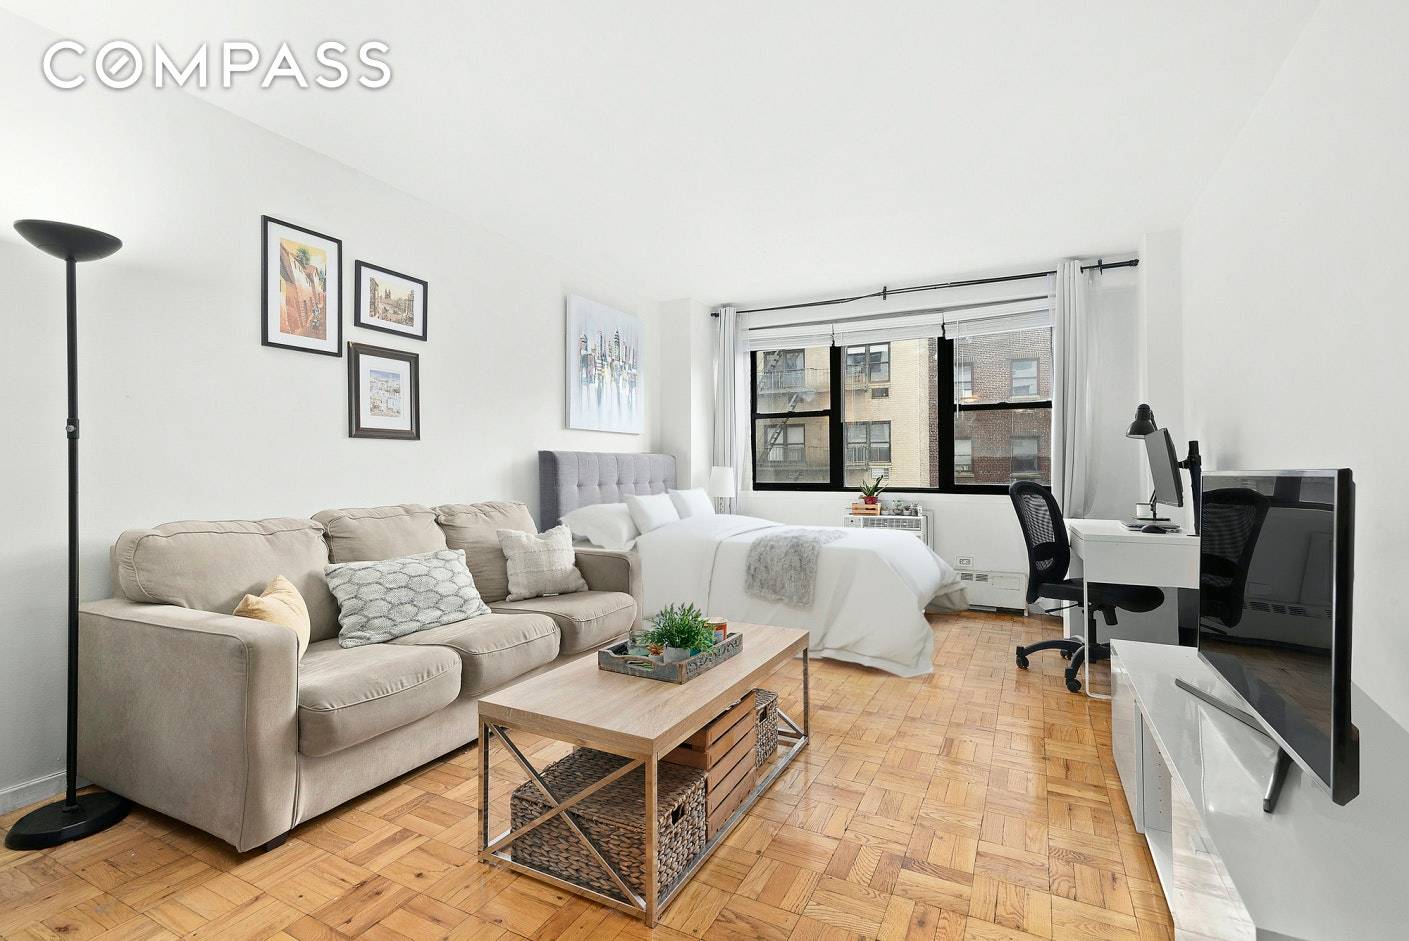 210 EAST 15TH STREET, 5P Lovely North facing studio in a very sought after location.